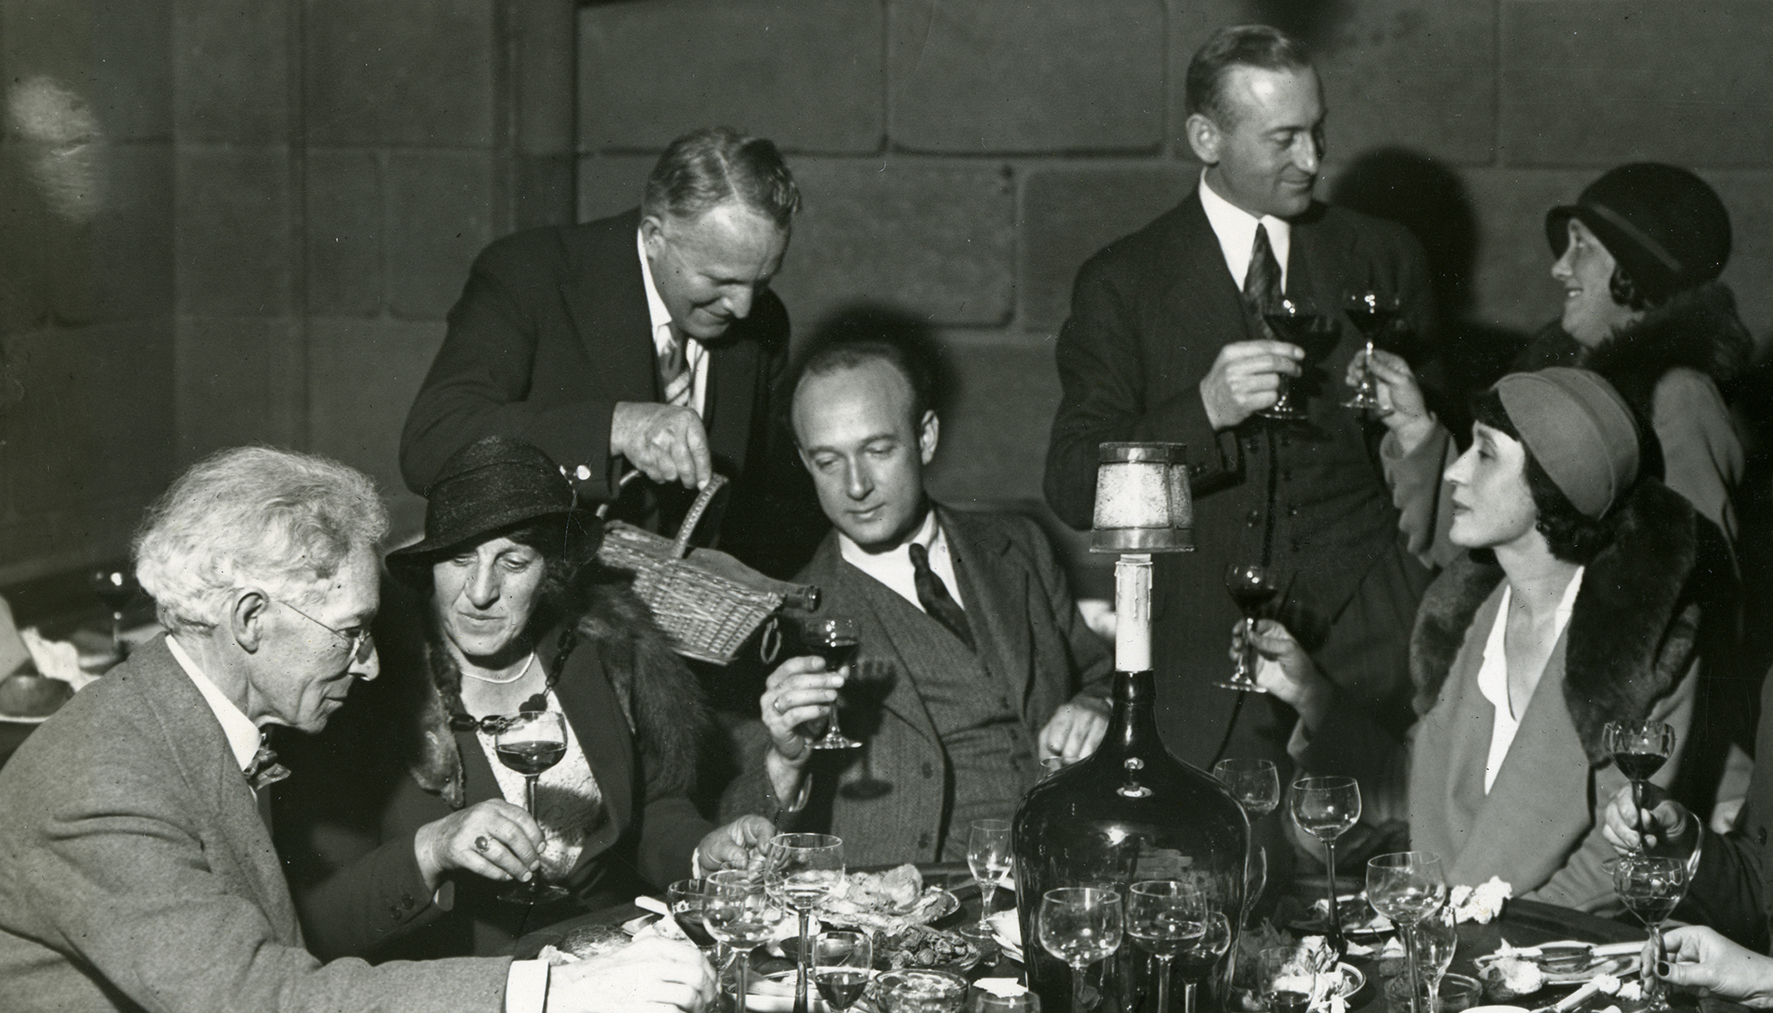 Dinner party, ca. 1935